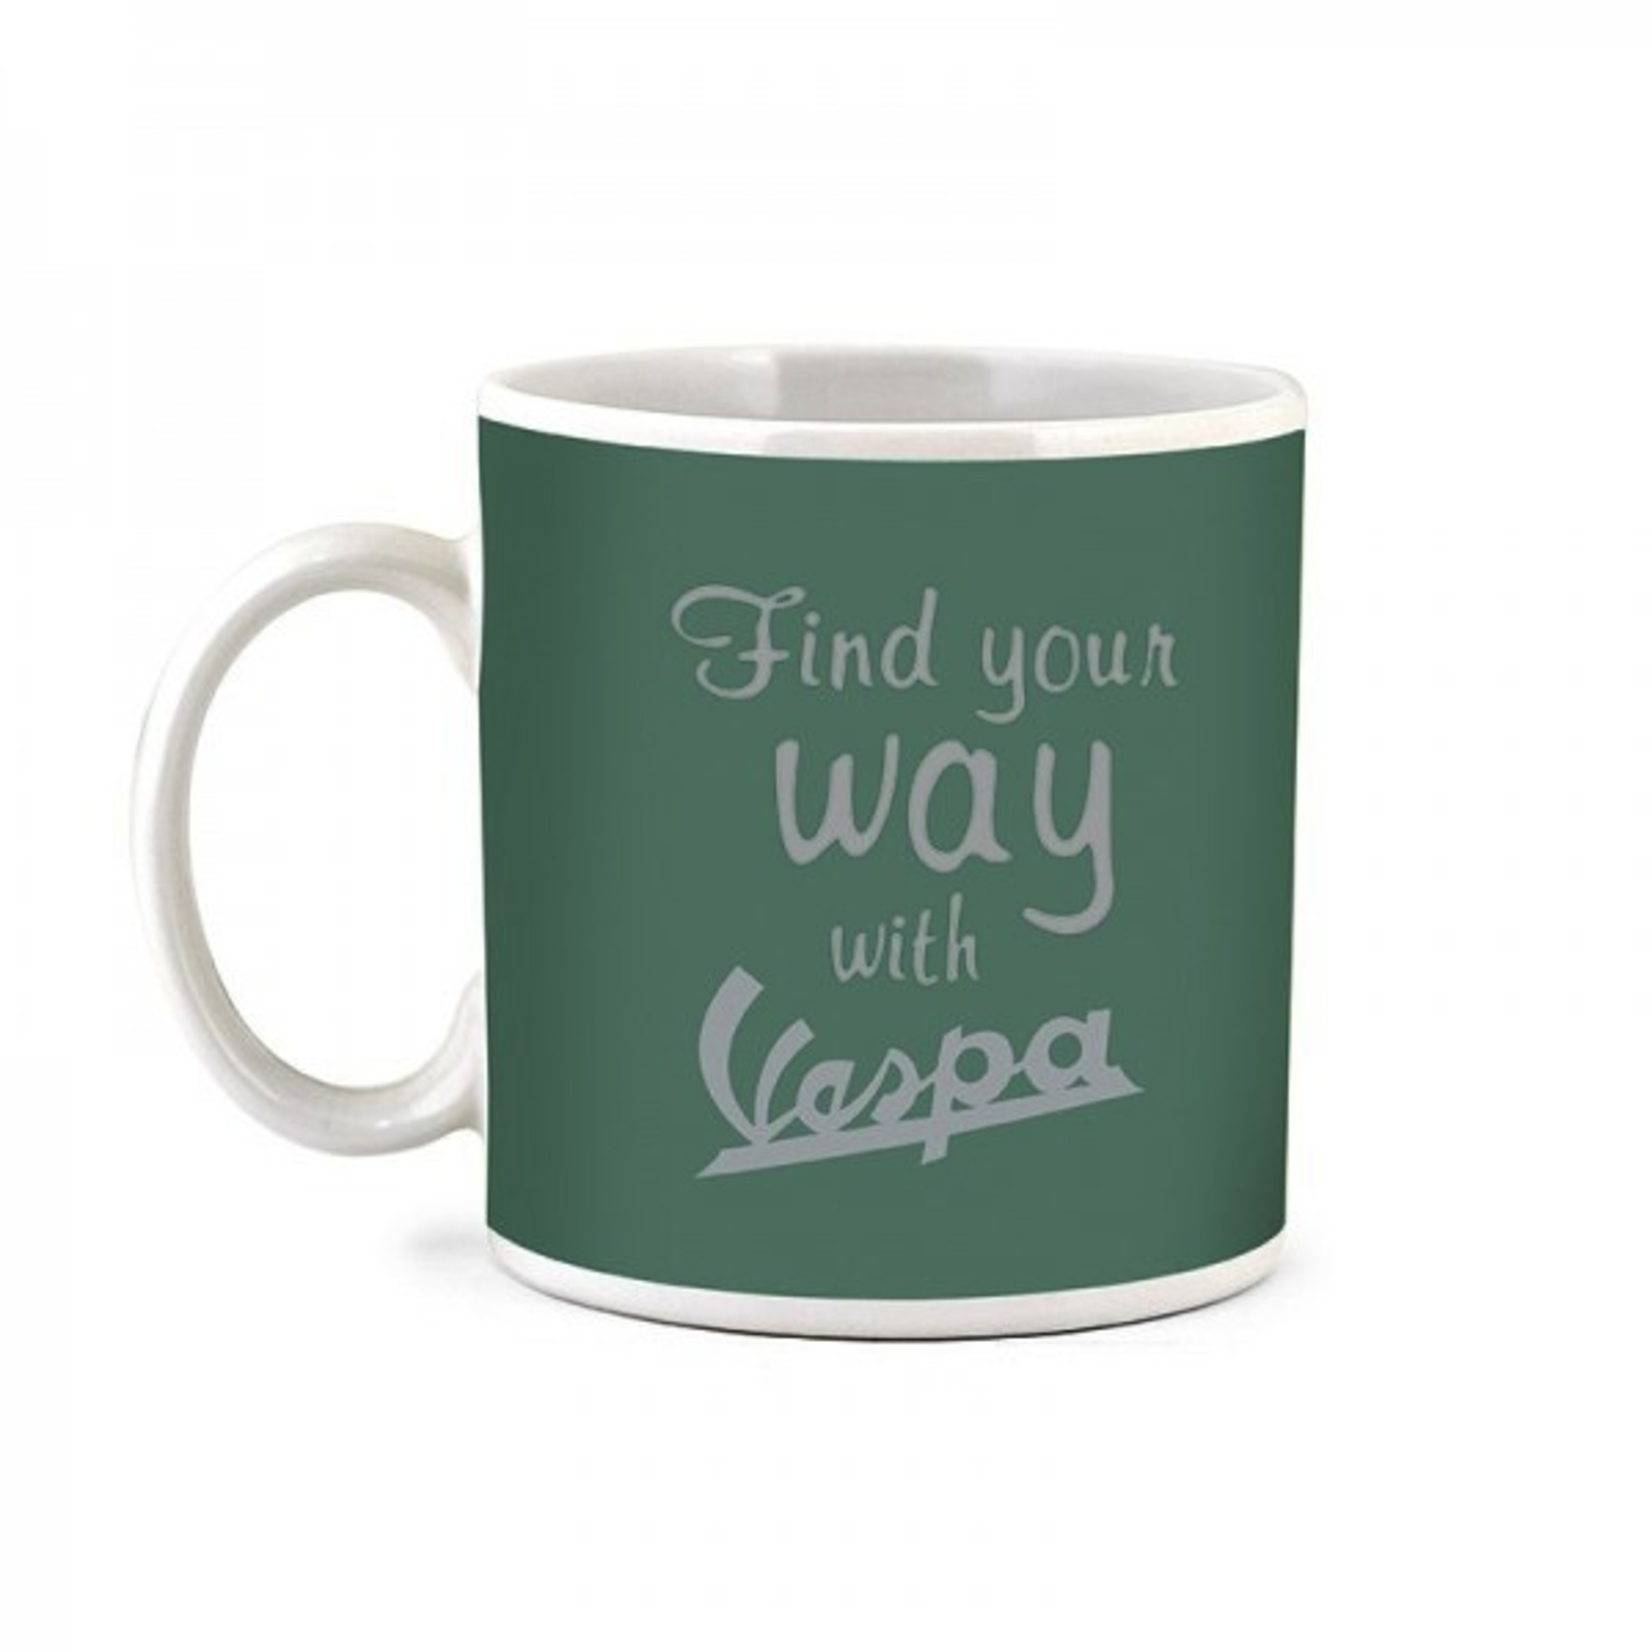 Lifestyle Mug, "Find Your Way With Vespa"